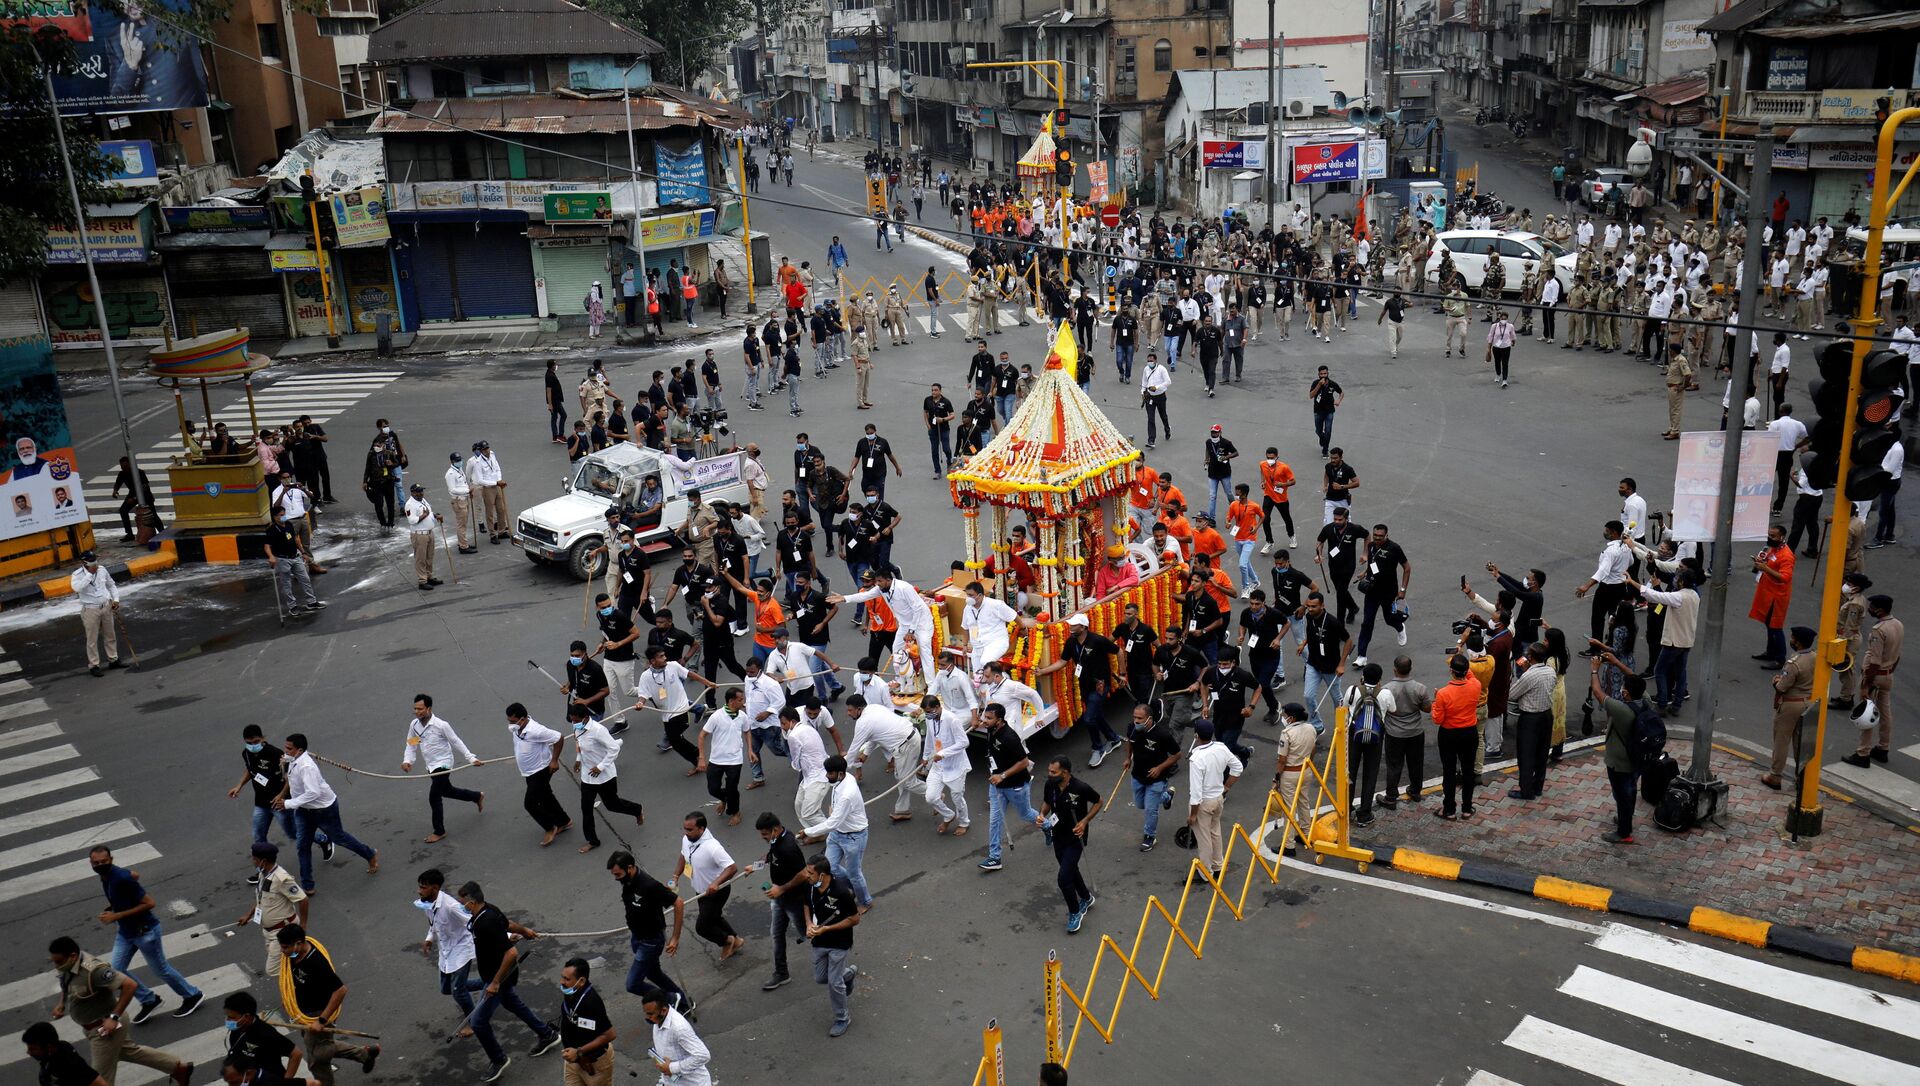 Hindu devotees pull a Rath or a chariot of Lord Jagannath, along a road escorted by police during the annual Rath Yatra, or chariot procession, during the ongoing coronavirus disease (COVID-19) outbreak, in Ahmedabad, India, July 12, 2021 - Sputnik International, 1920, 12.07.2021